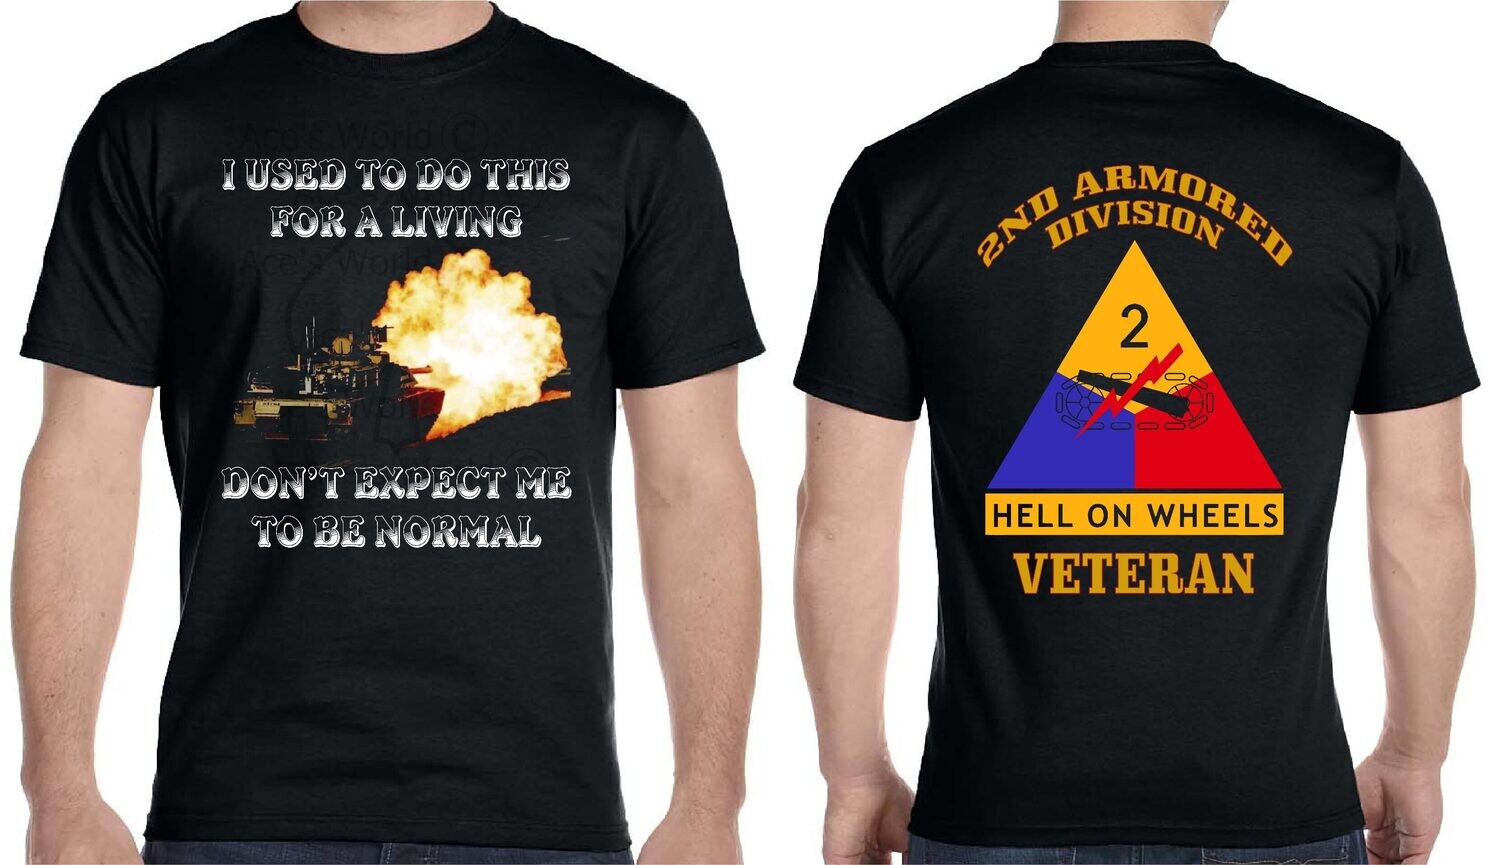 I USED TO DO THIS 2ND ARMORED DIVISION VETERAN